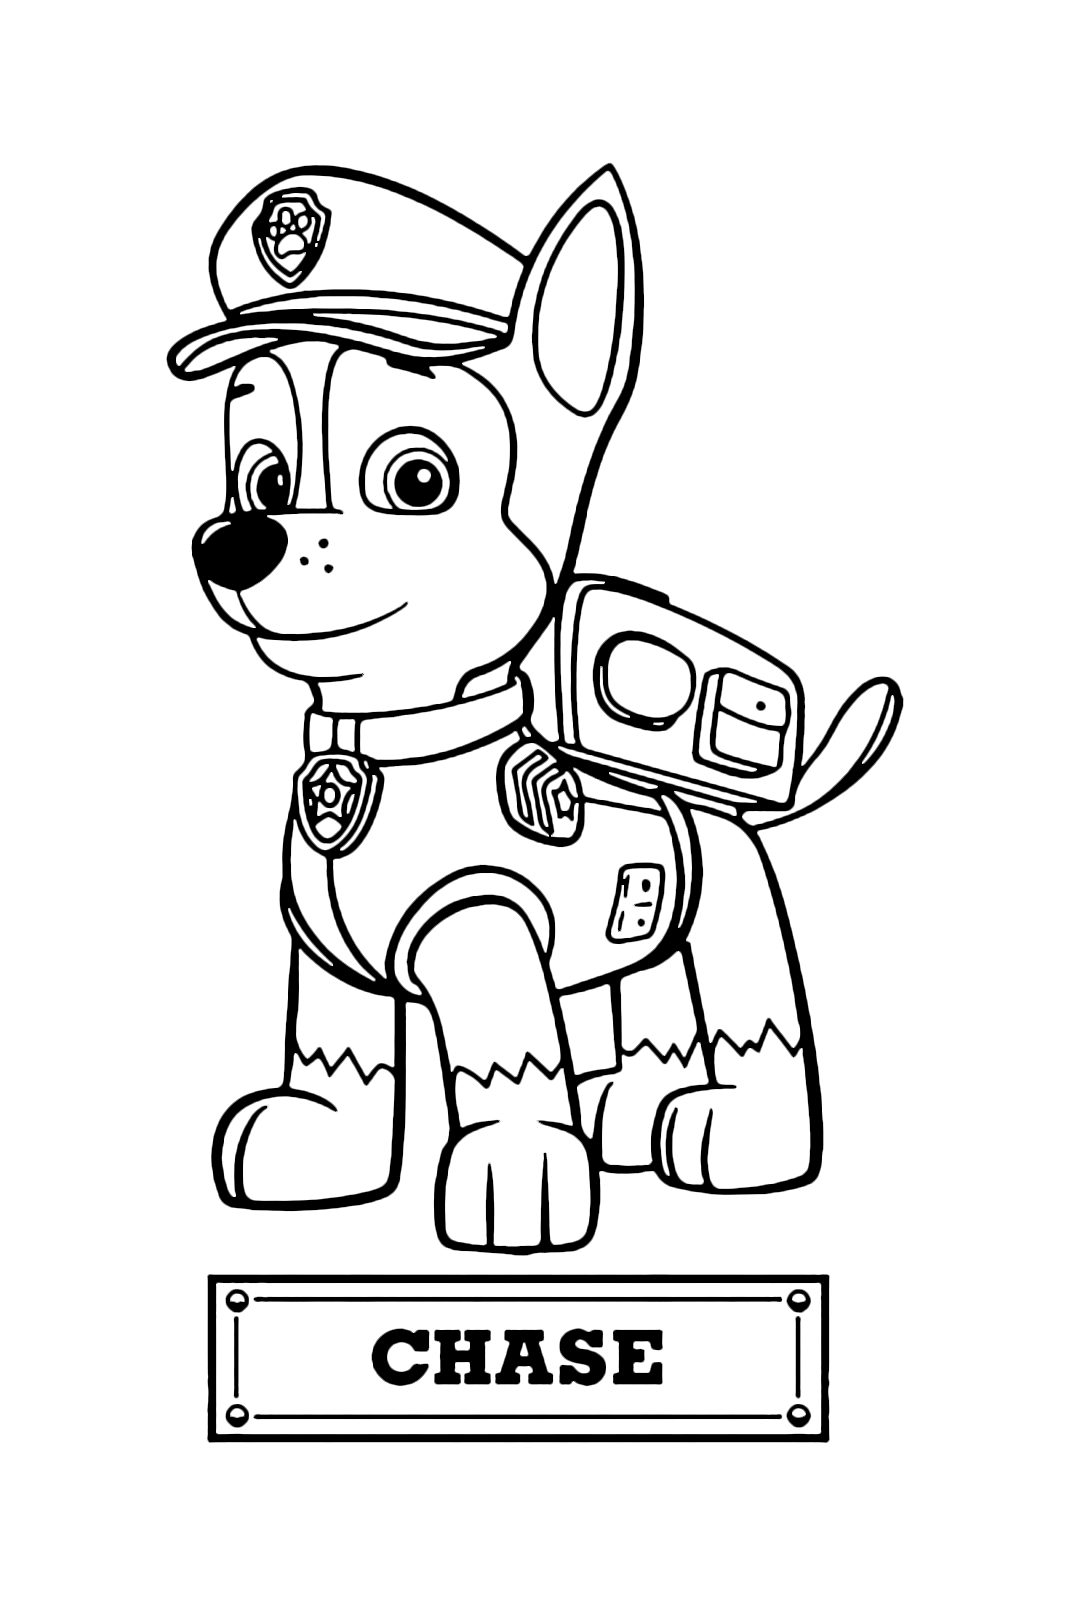 Printable Chase Paw Patrol Coloring Pages - chase the police dog coloring pages